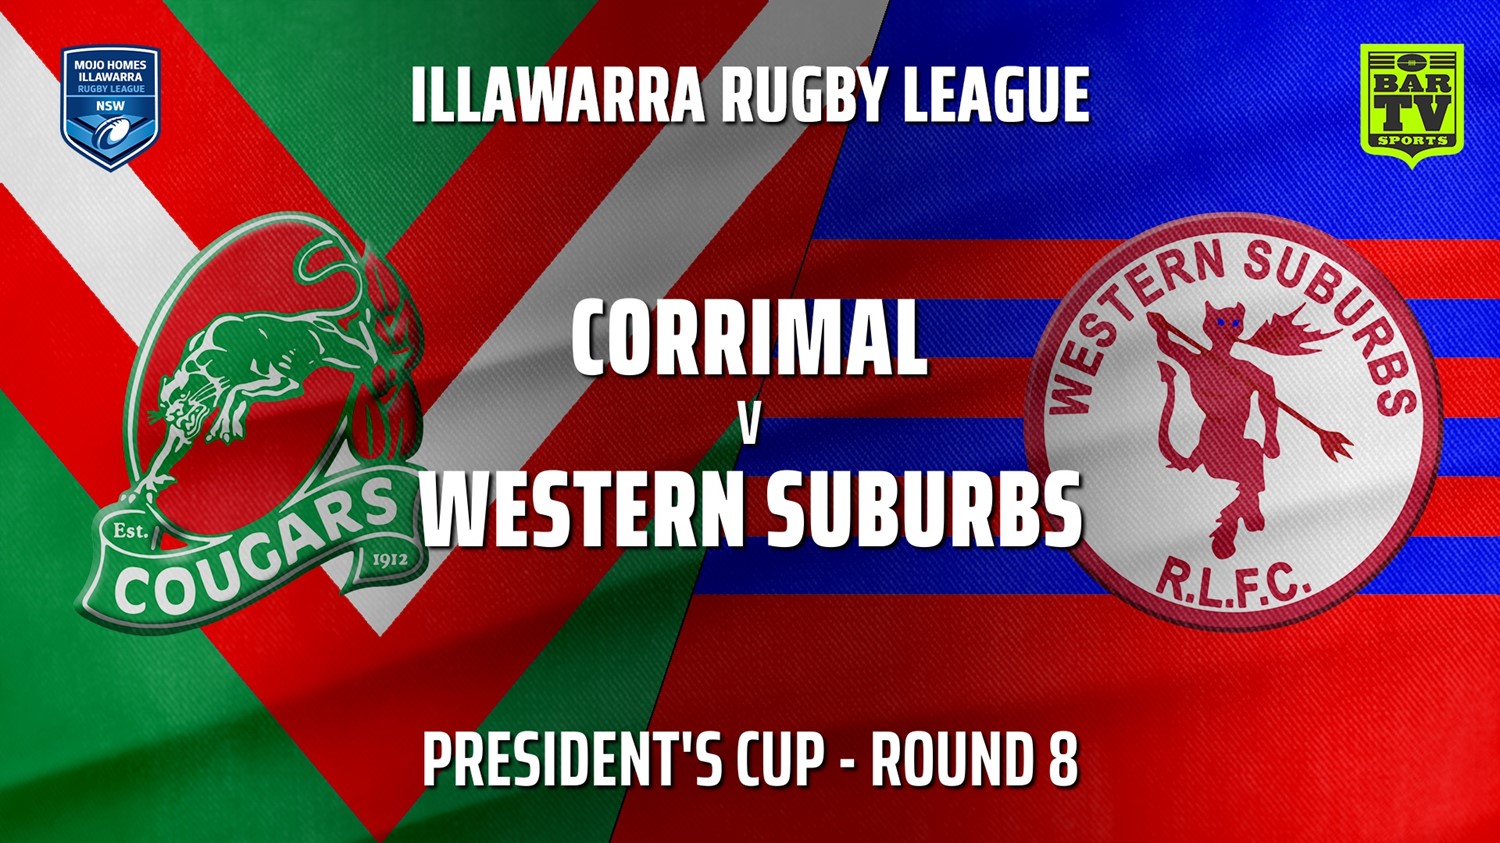 210605-IRL Round 8 - President's Cup - Corrimal Cougars v Western Suburbs Devils Slate Image